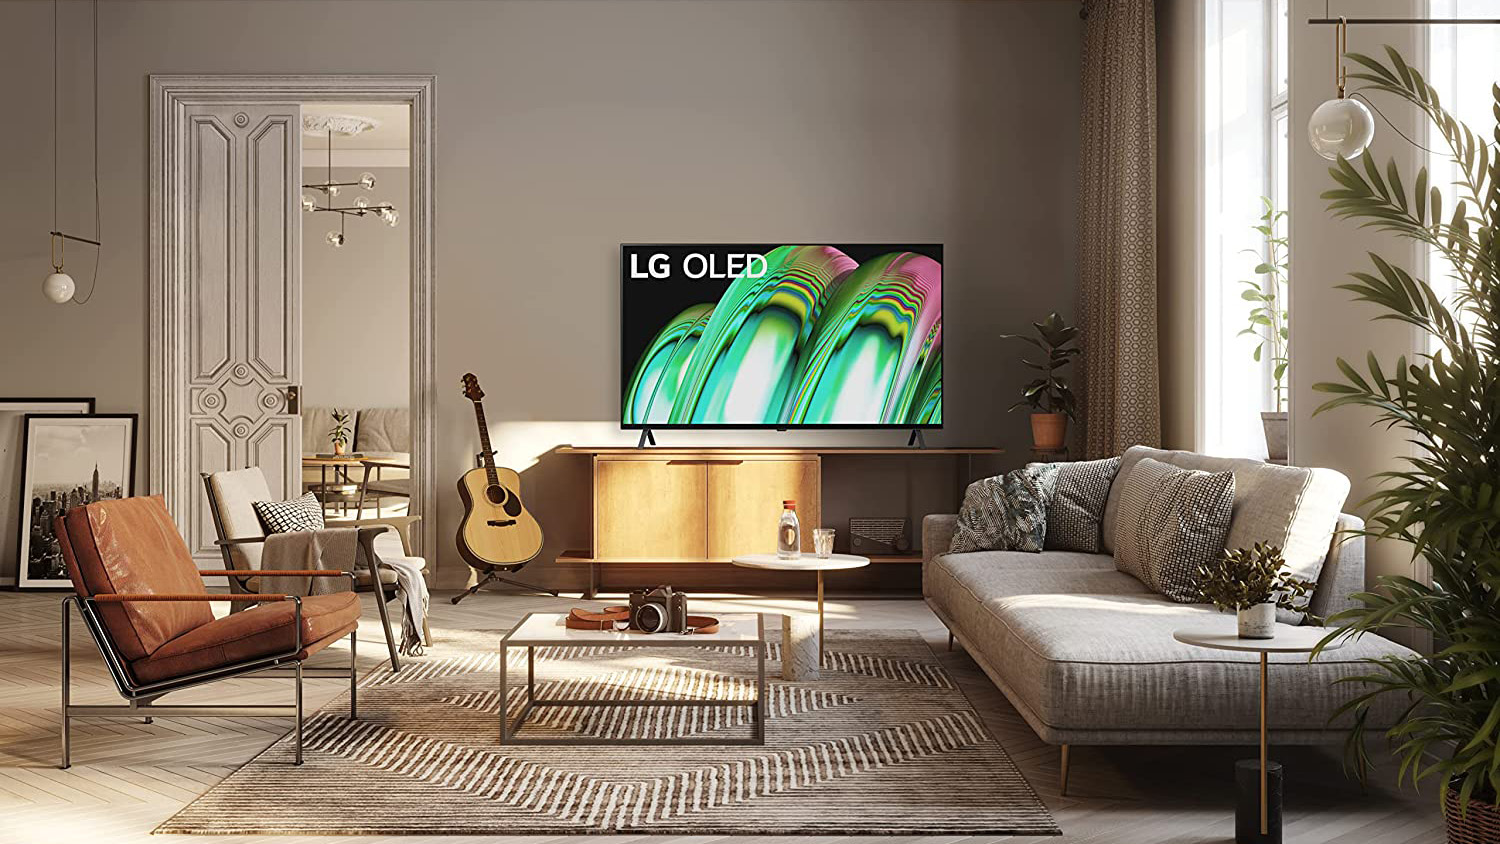 LG A3 OLED TV: everything we know about the mysterious cheaper